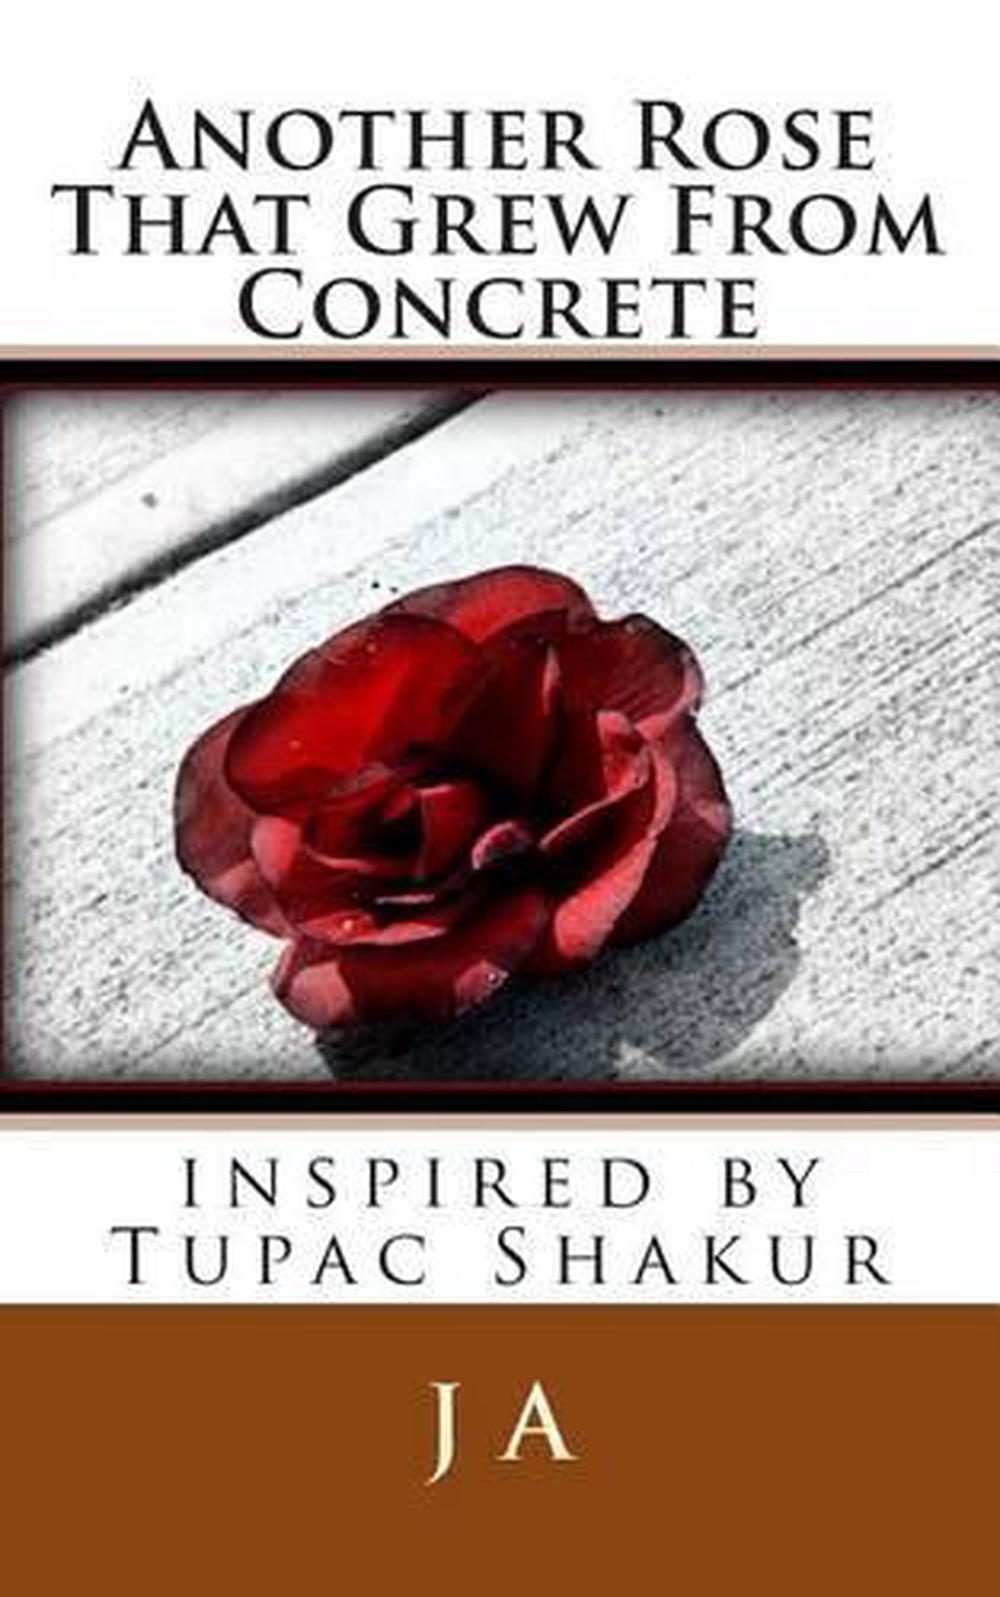 poem by tupac the rose that grew from concrete